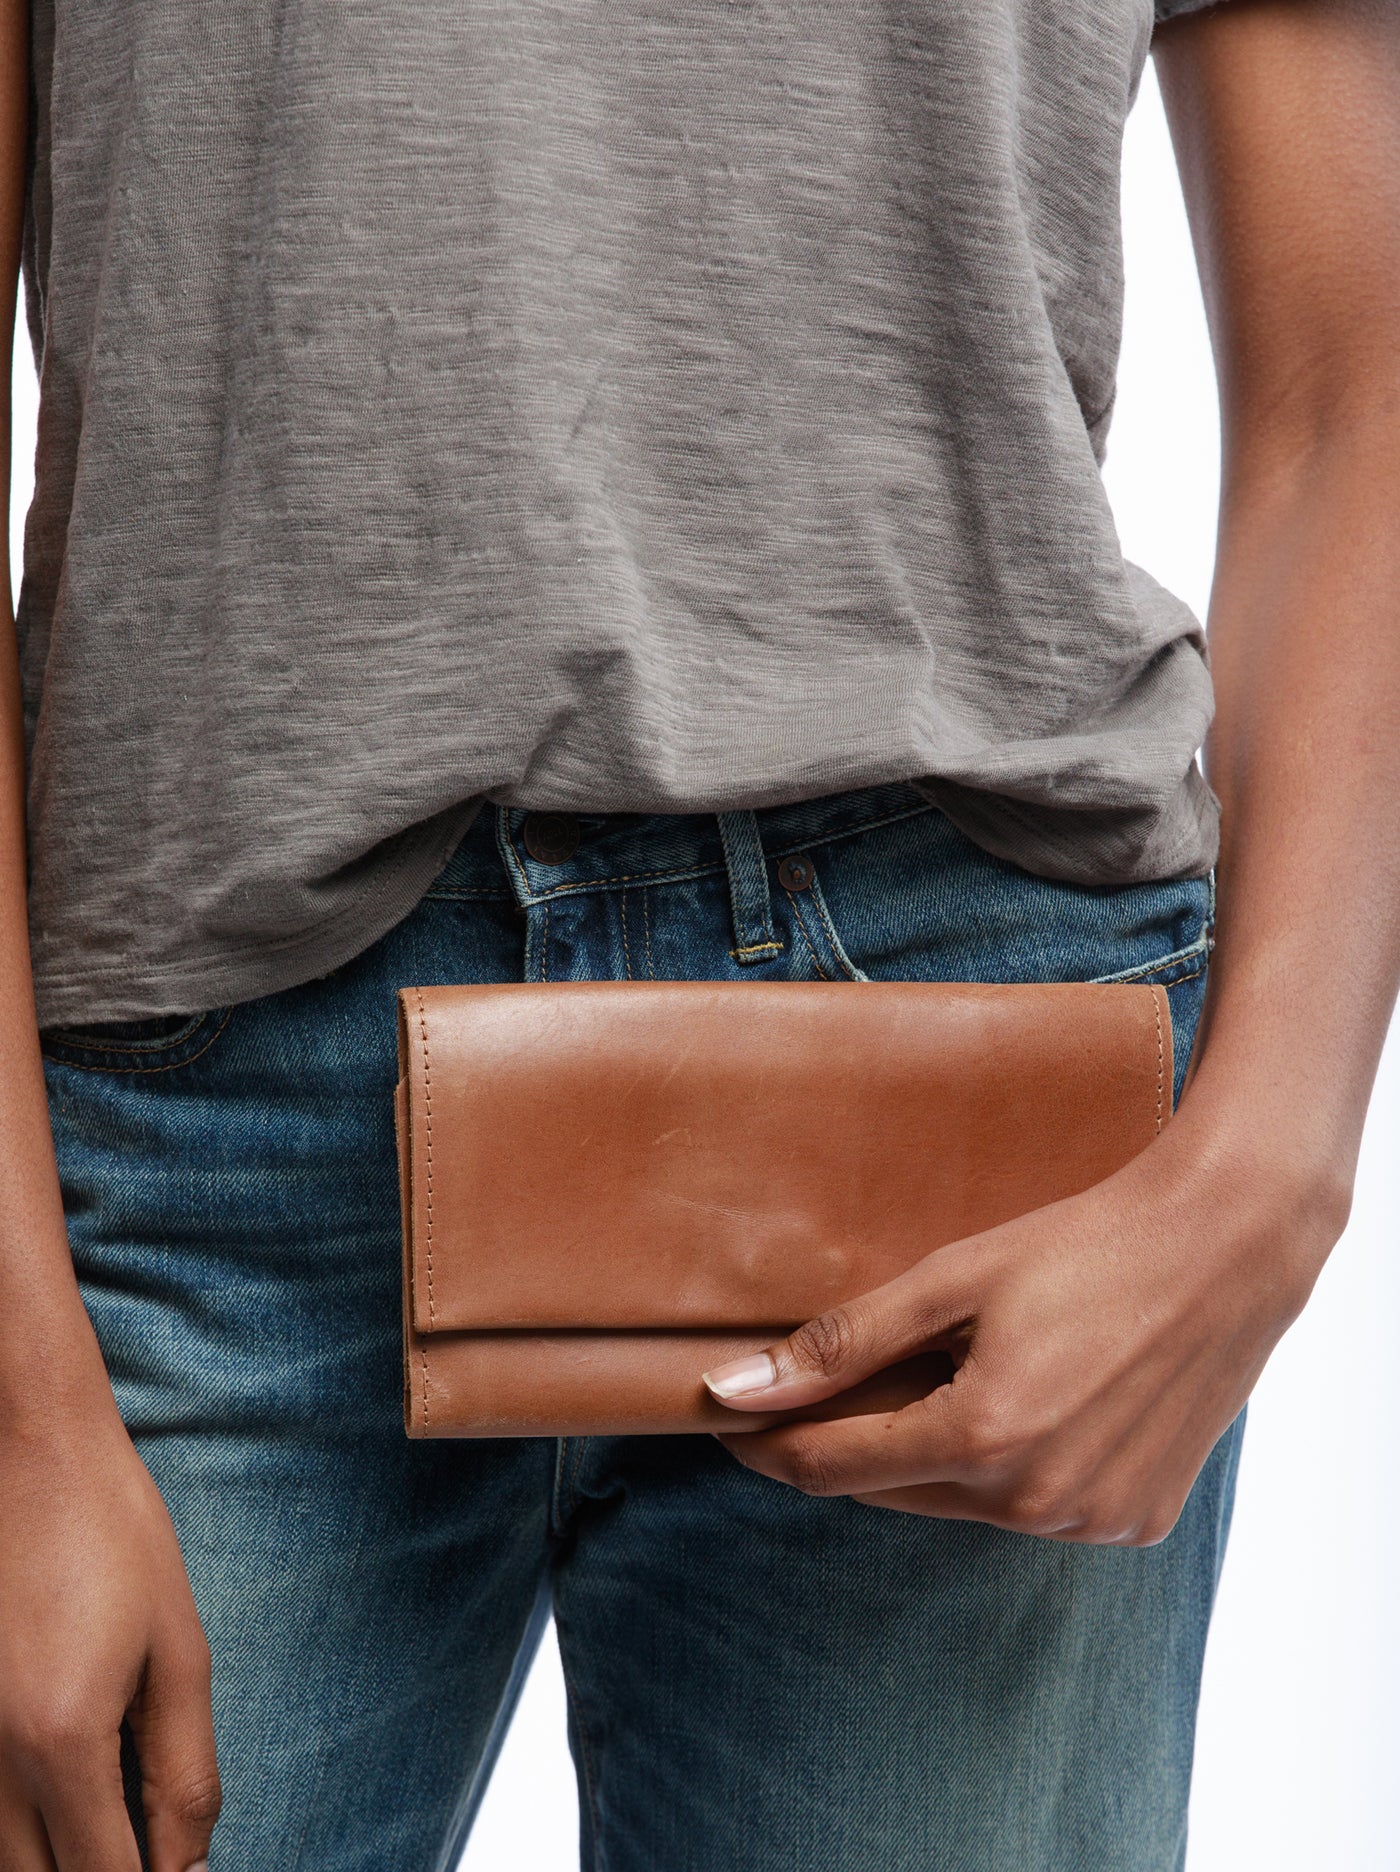 Able Debre Wallet - Whiskey